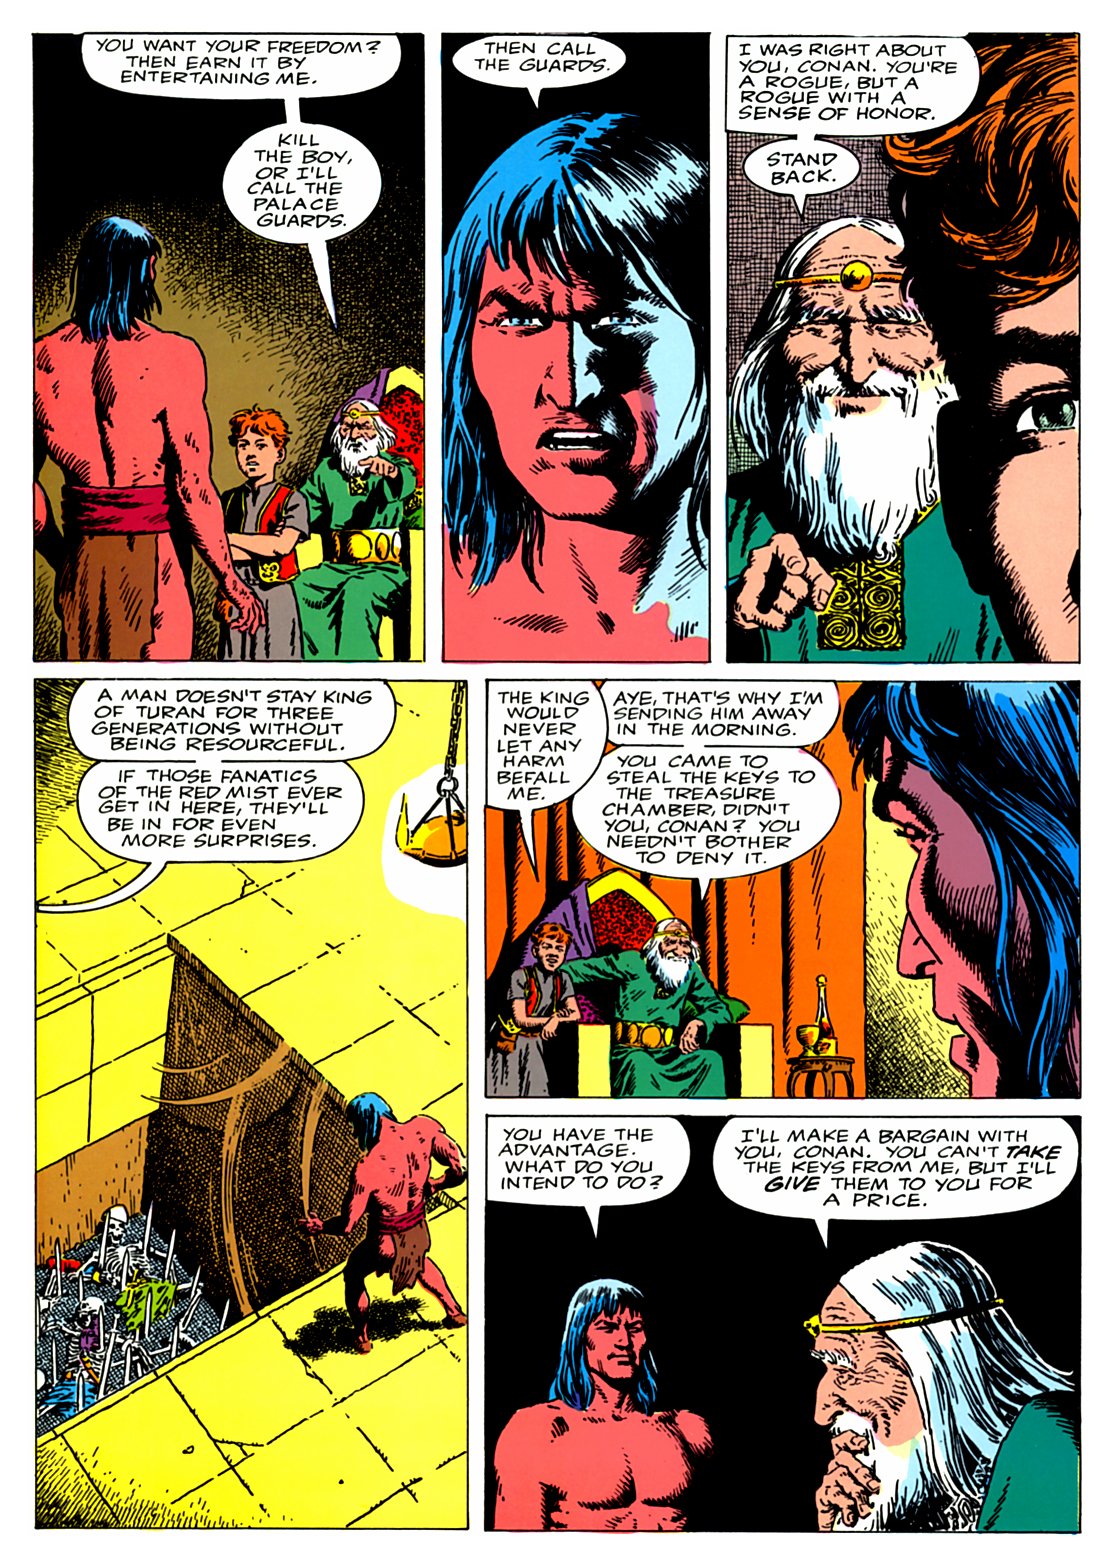 Read online Marvel Graphic Novel comic -  Issue #28 - Conan - The Reaver - 31